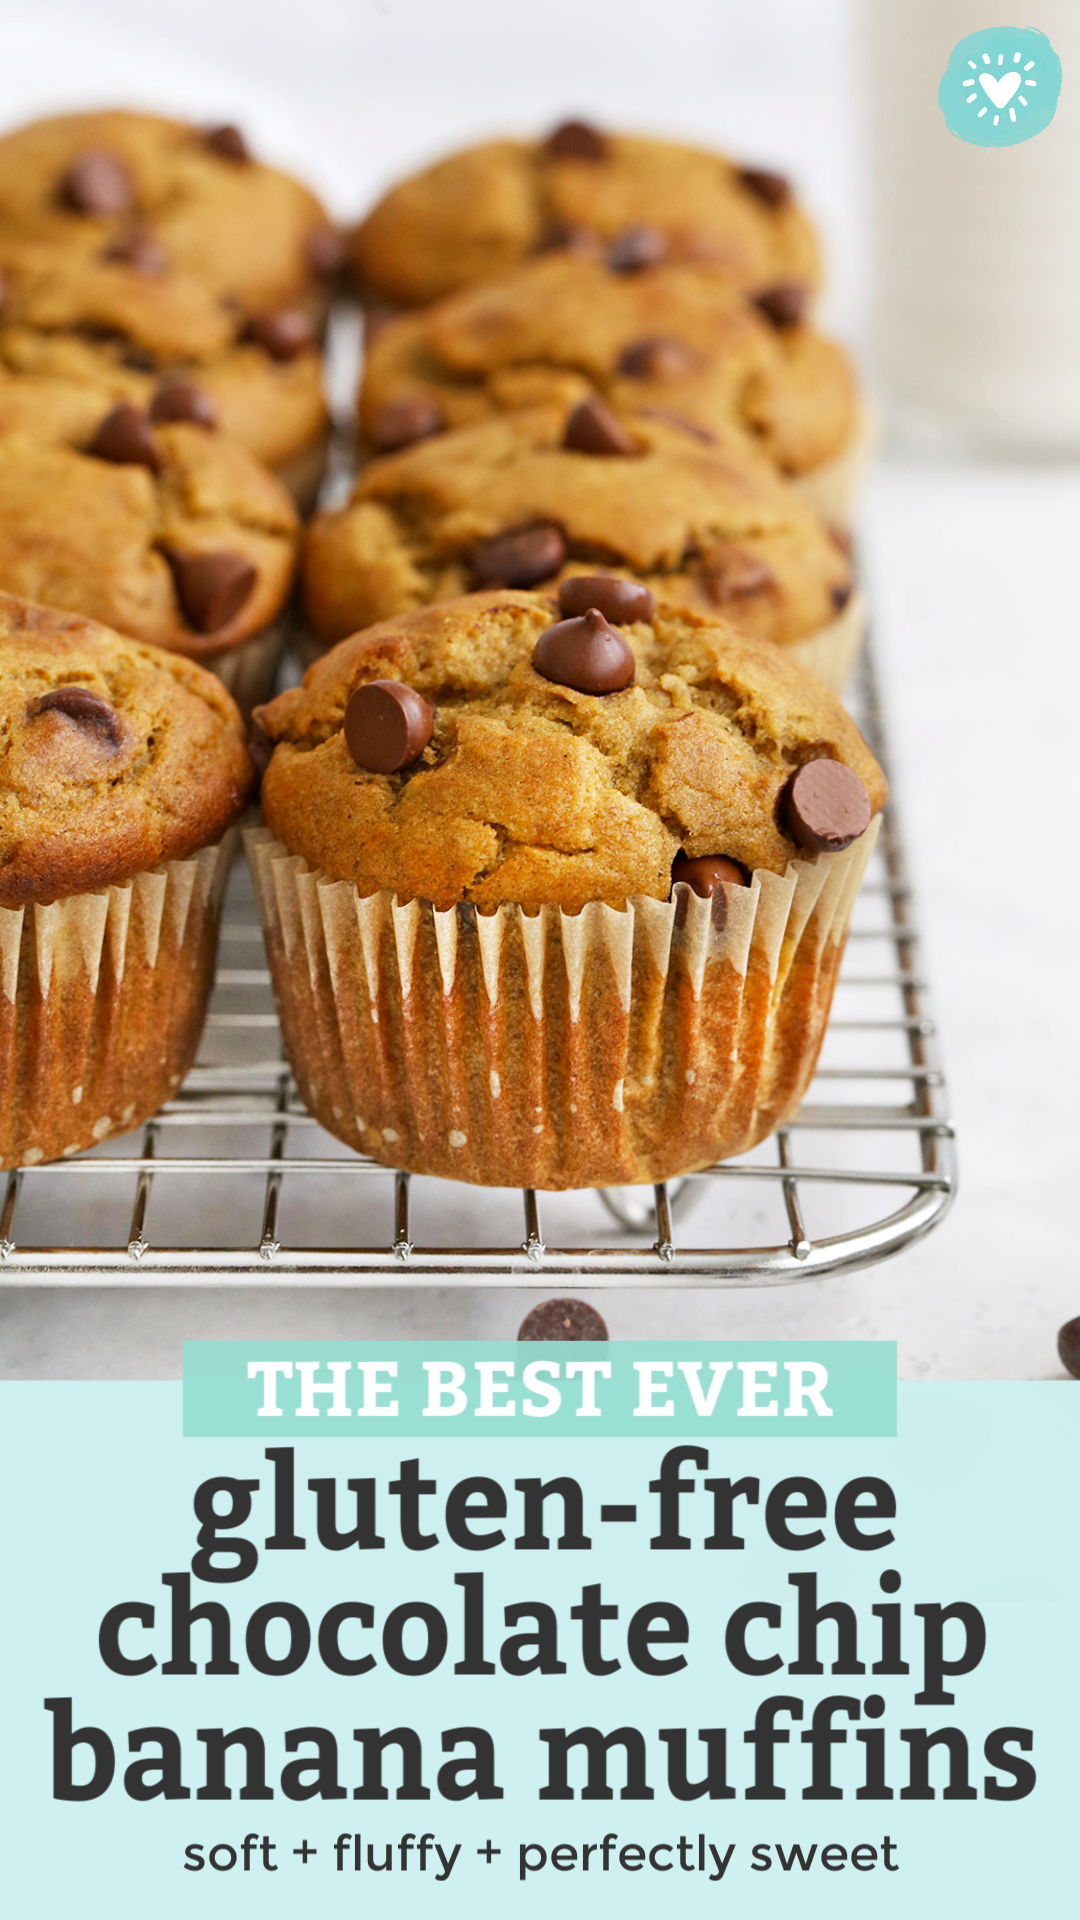 Front view of gluten-free banana chocolate chip muffins on a cooling rack, with text overlay that reads "The Best Ever Gluten-Free Chocolate Chip Banana Muffins. Soft + fluffy + perfectly sweet."